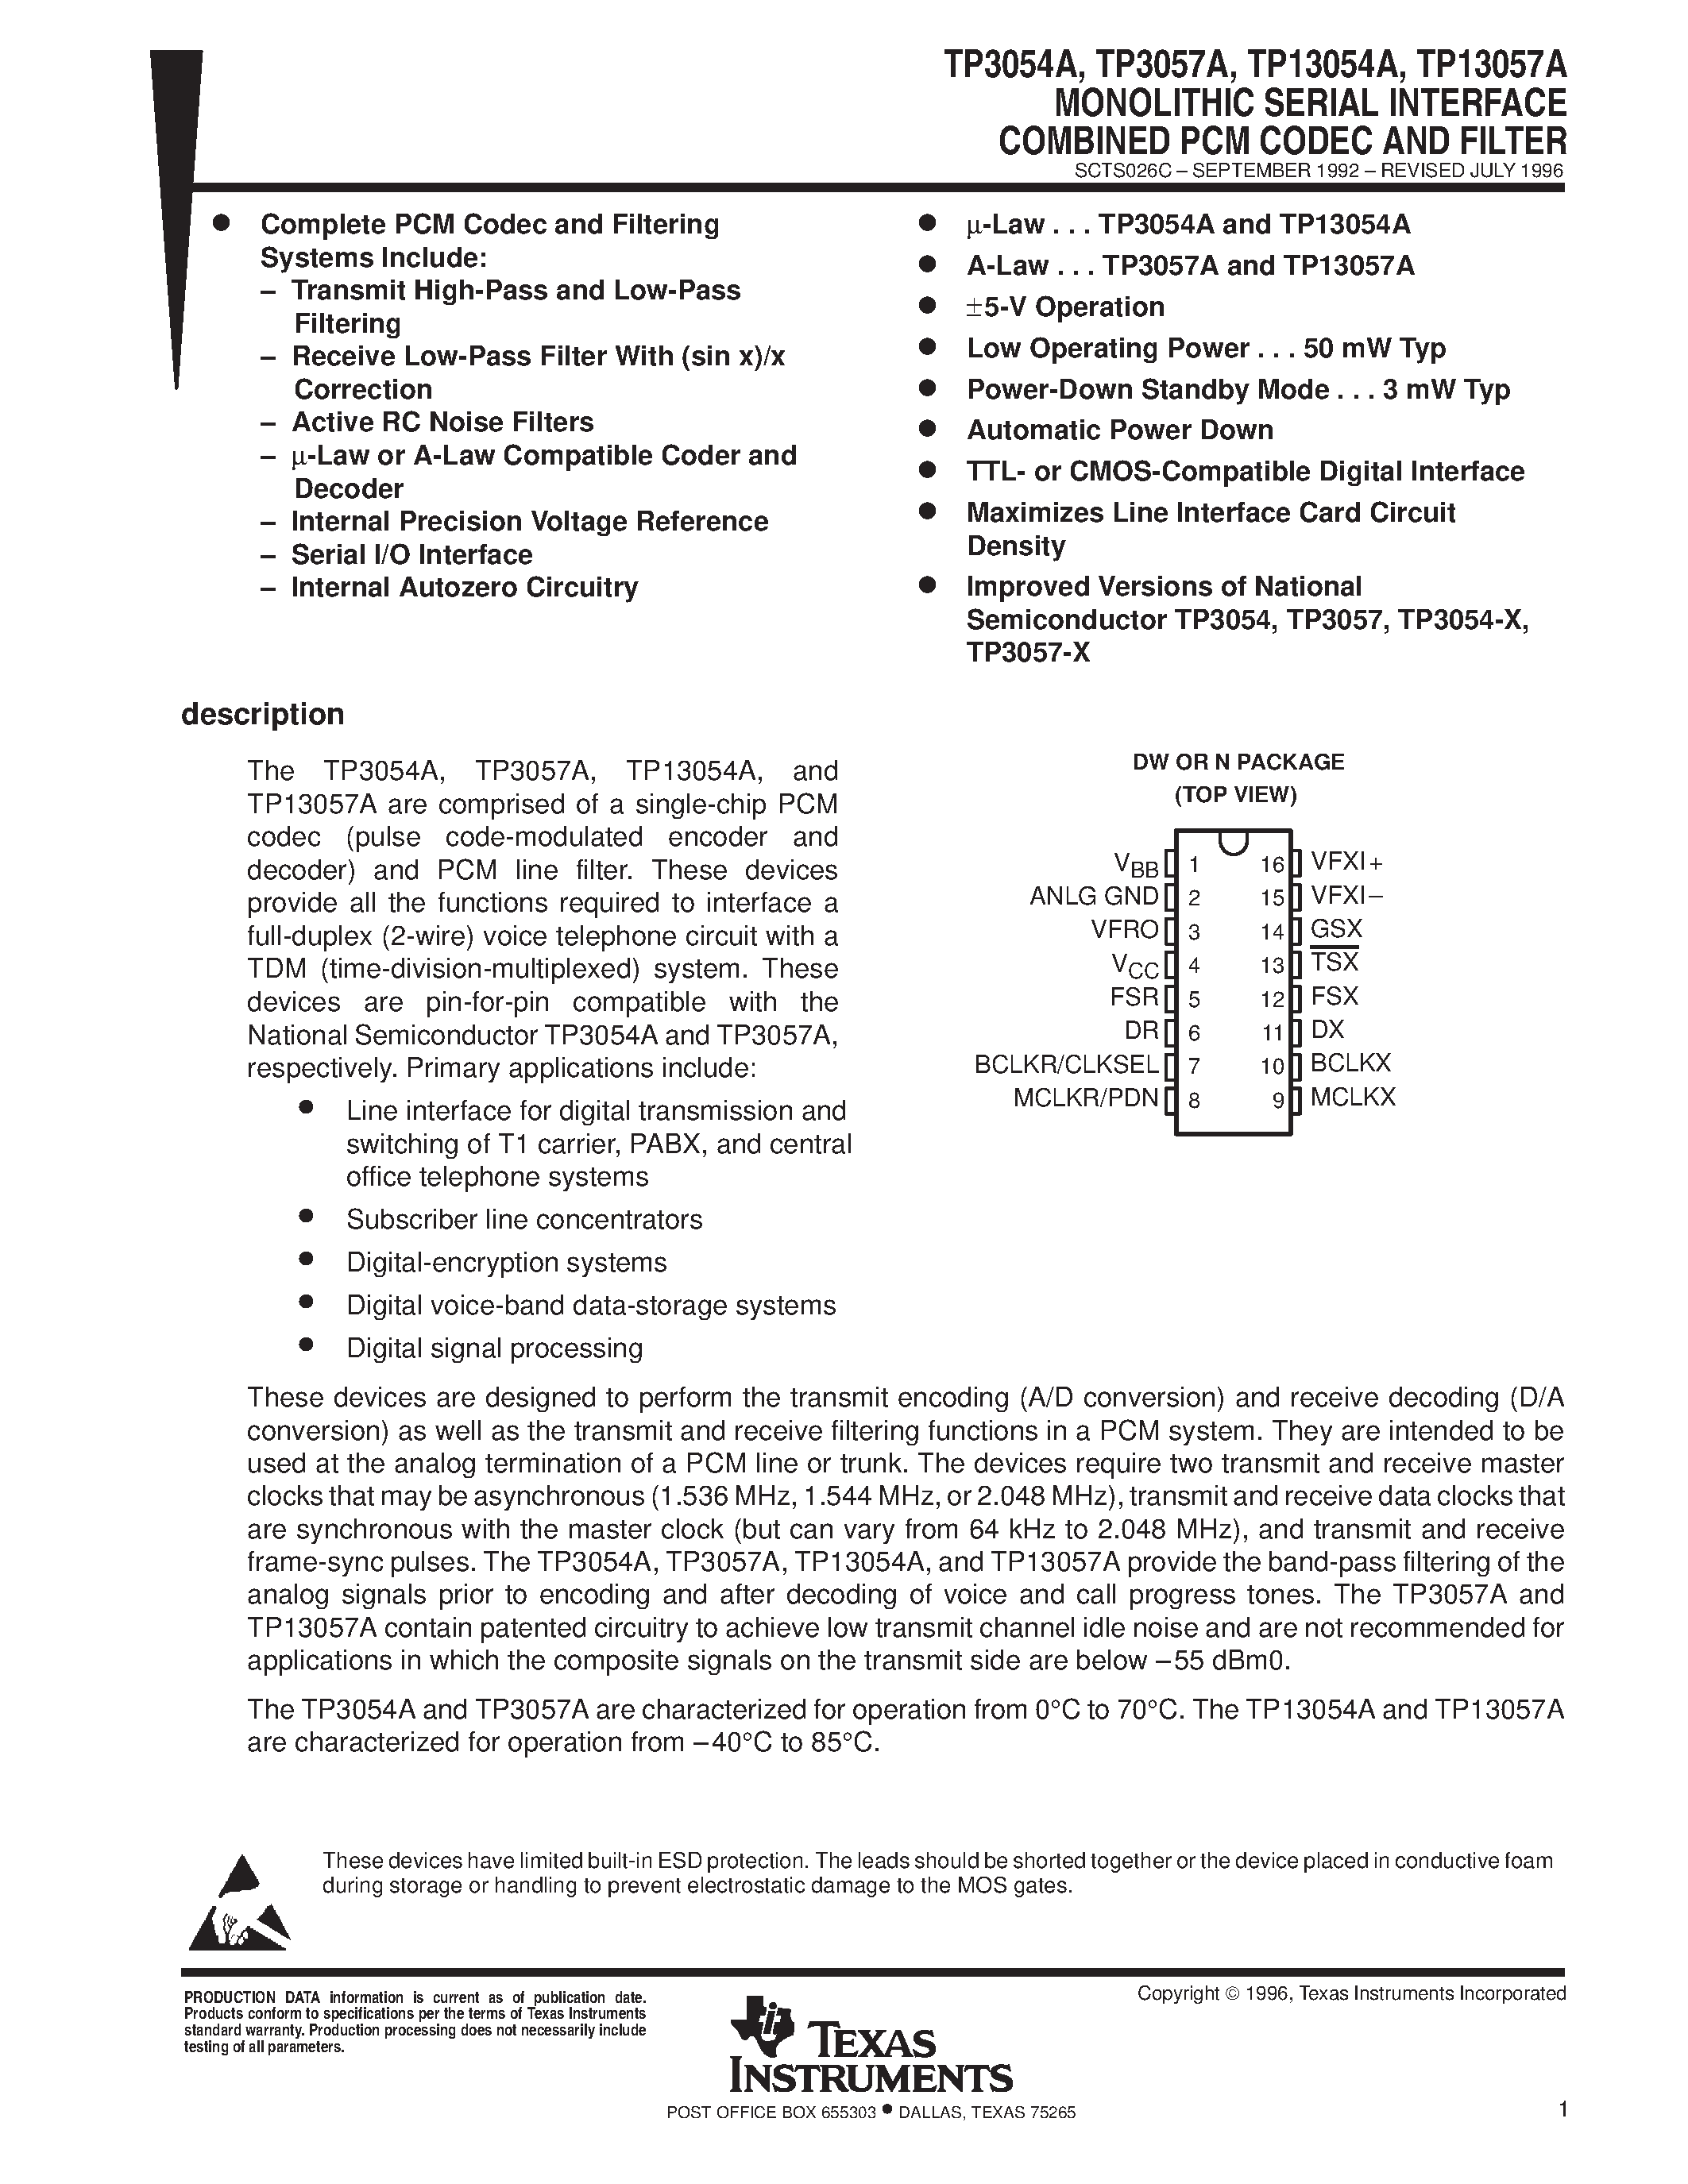 Datasheet TP13054A - MONOLITHIC SERIAL INTERFACE COMBINED PCM CODEC AND FILTER page 1